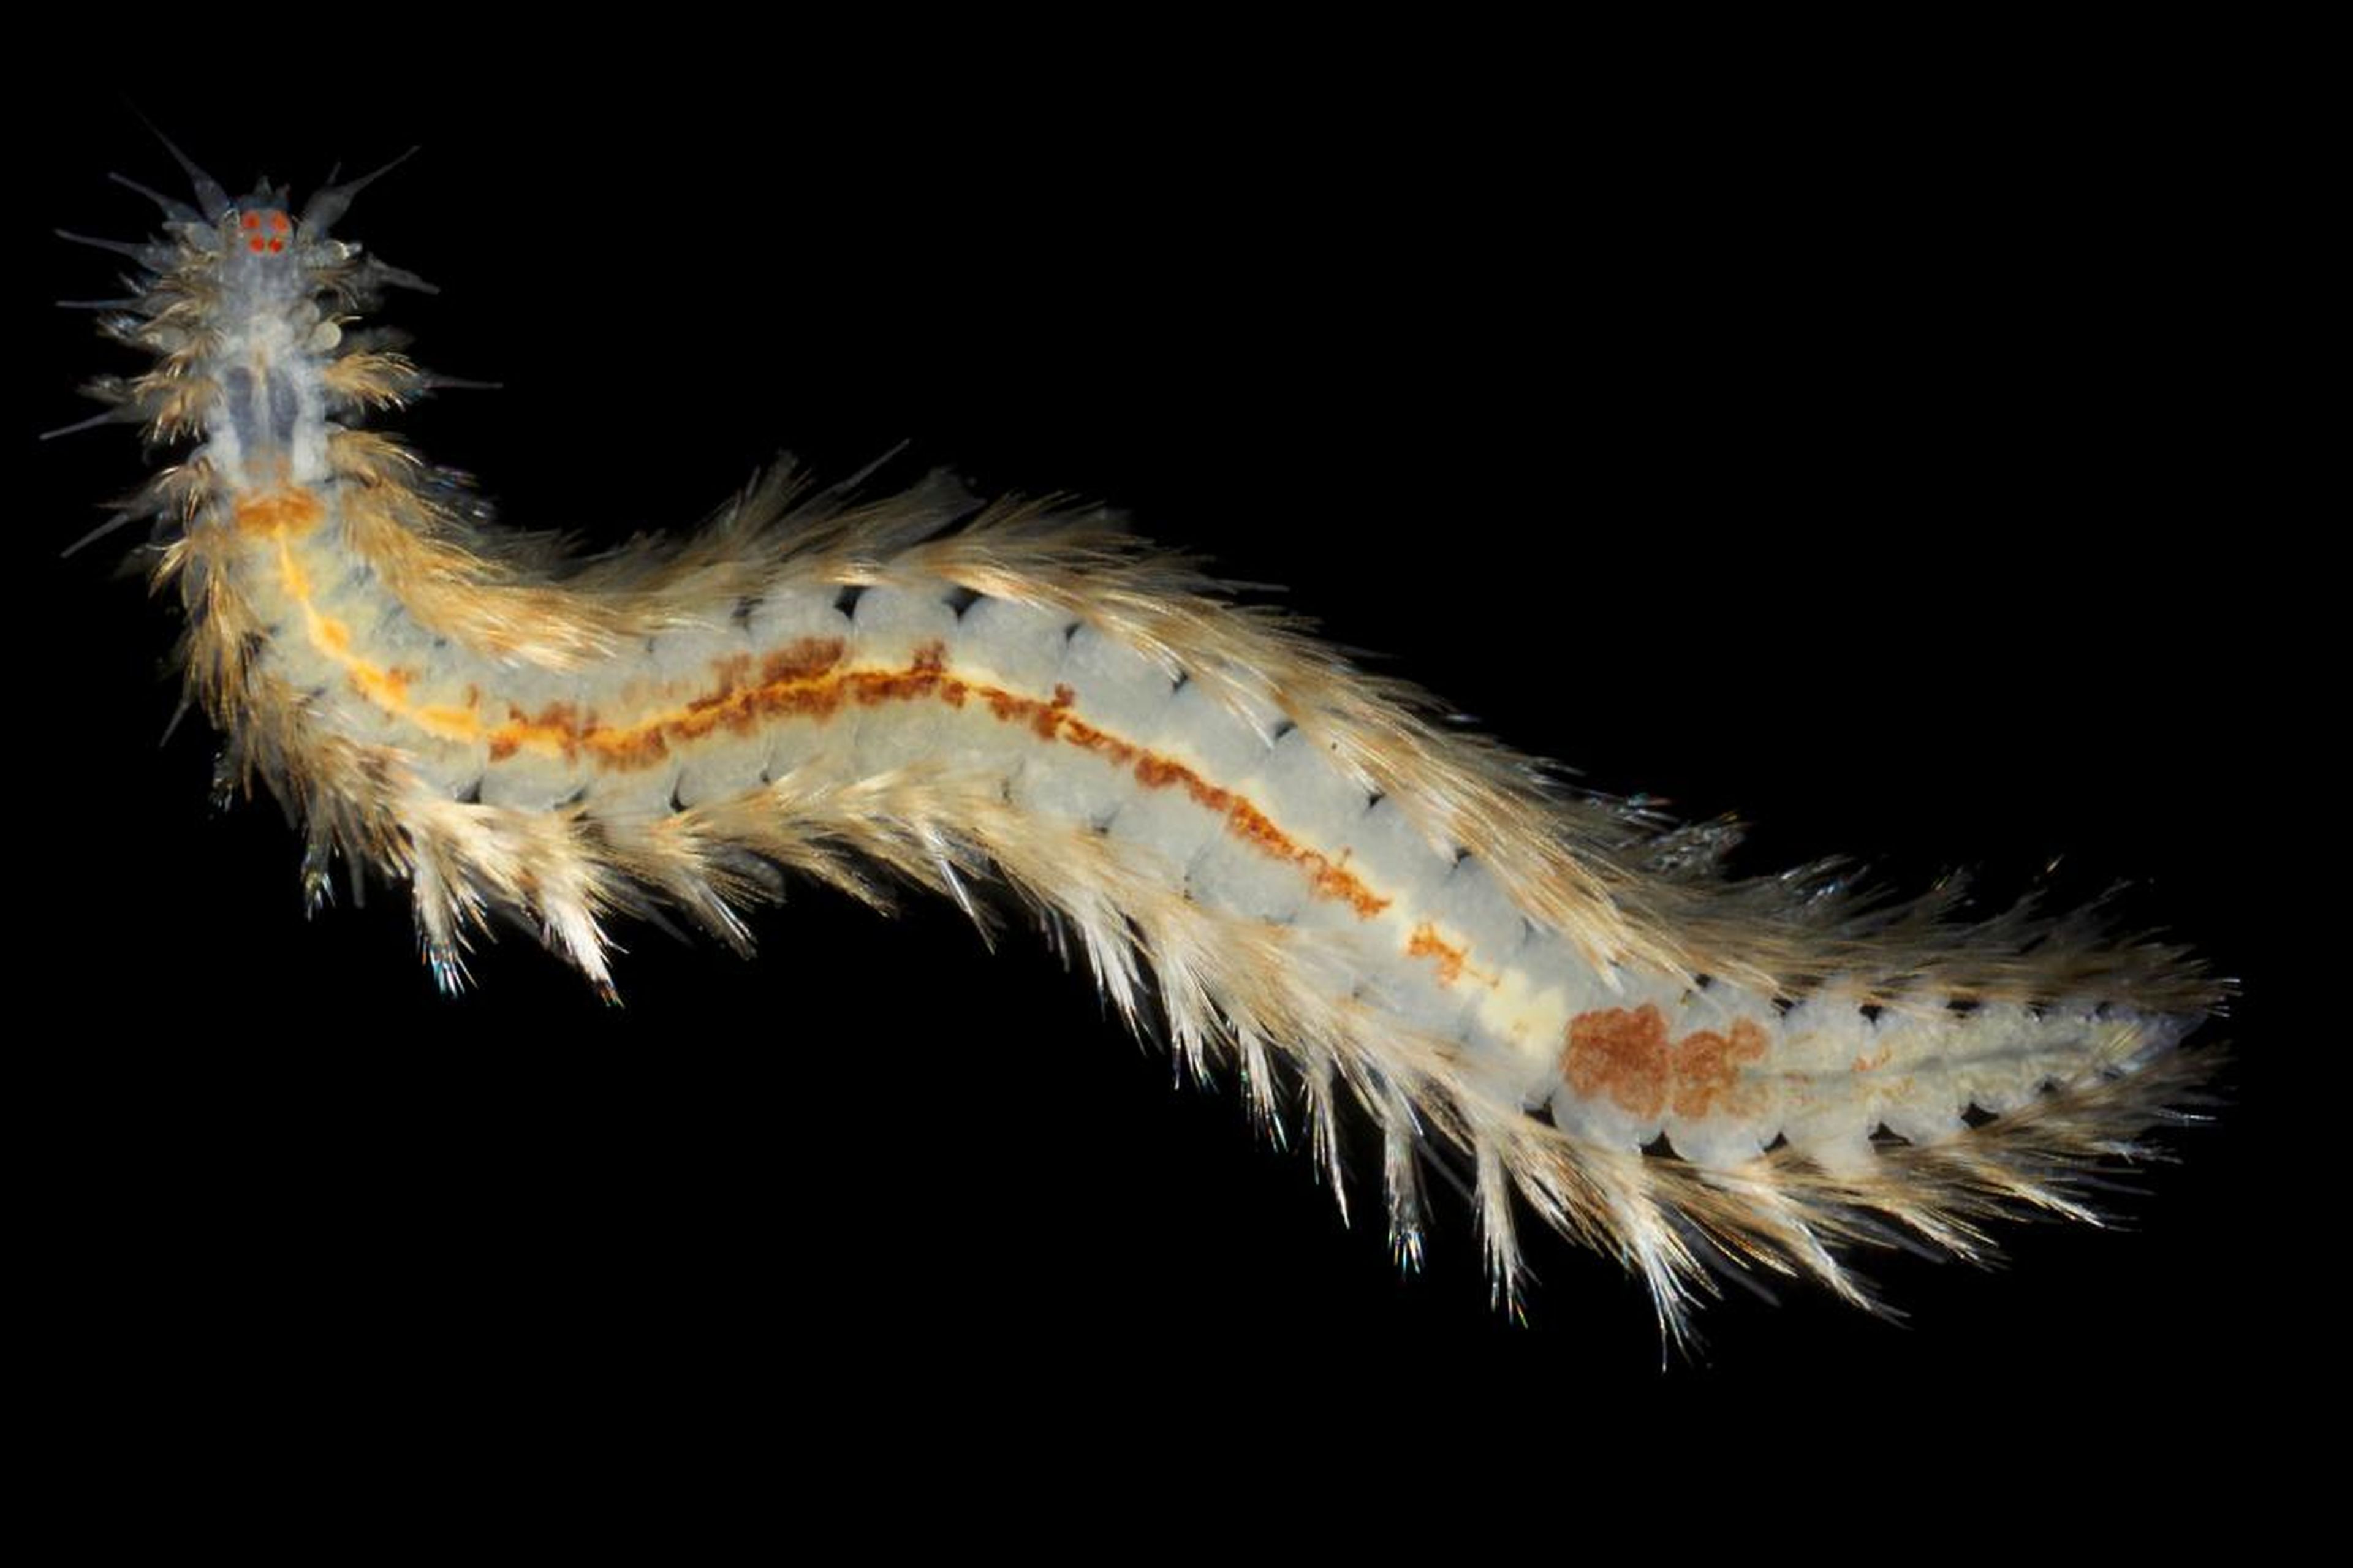 A segmented worm with movable hairs.